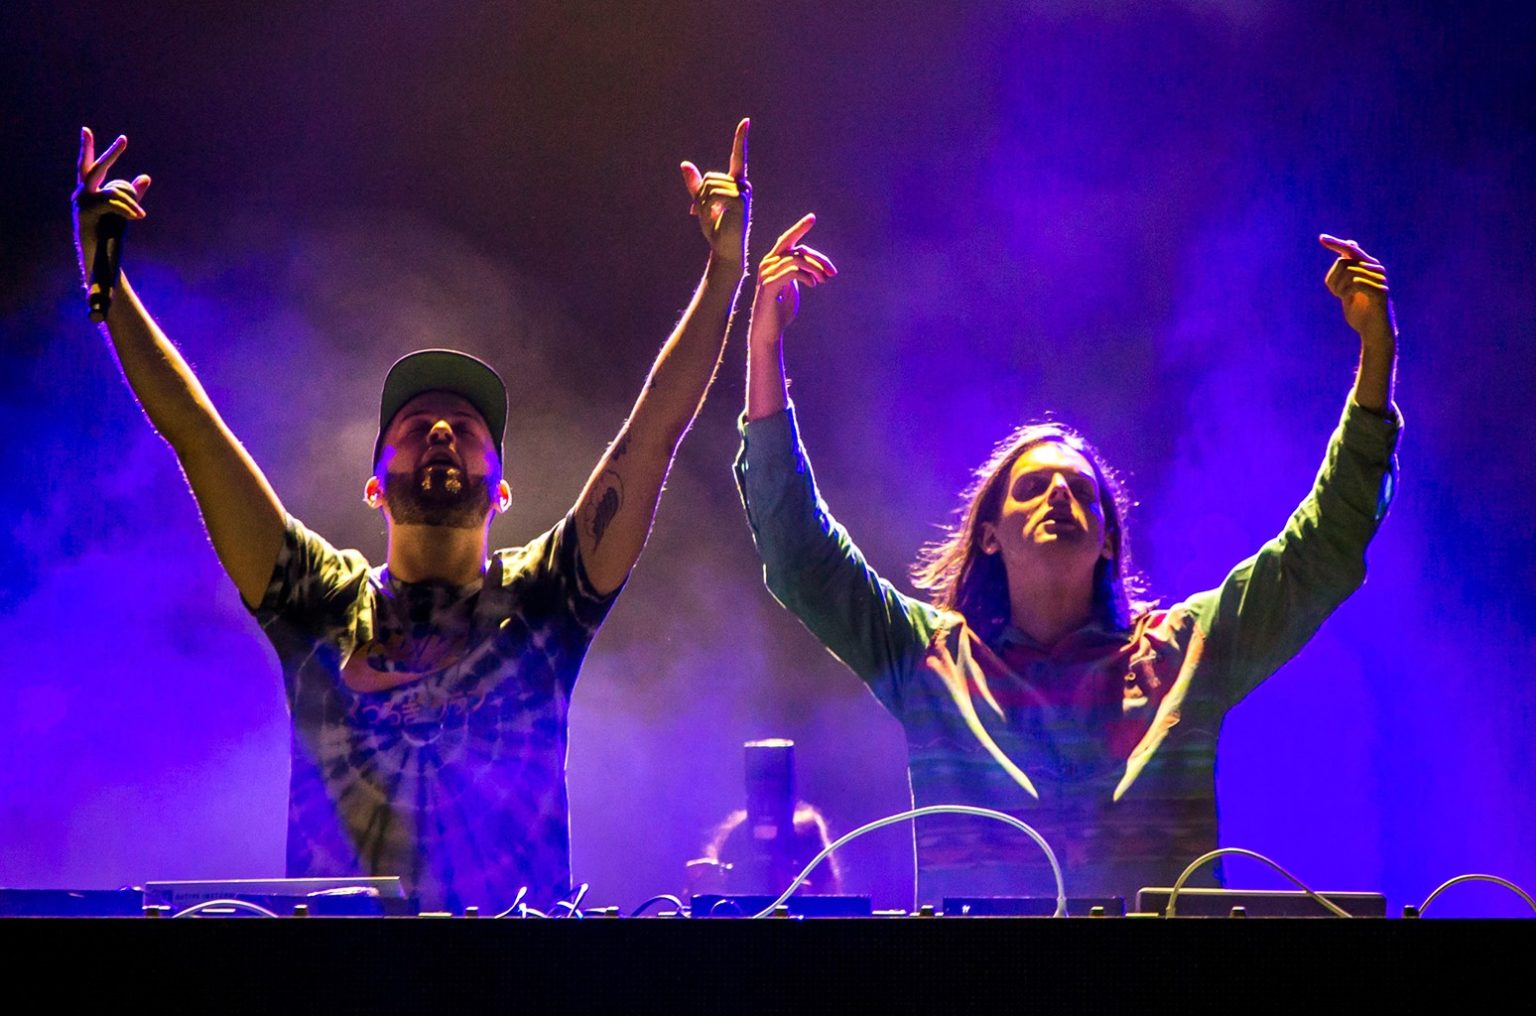 Zeds Dead Announce First Tour In Over A Year in "Deadbeats The Revival